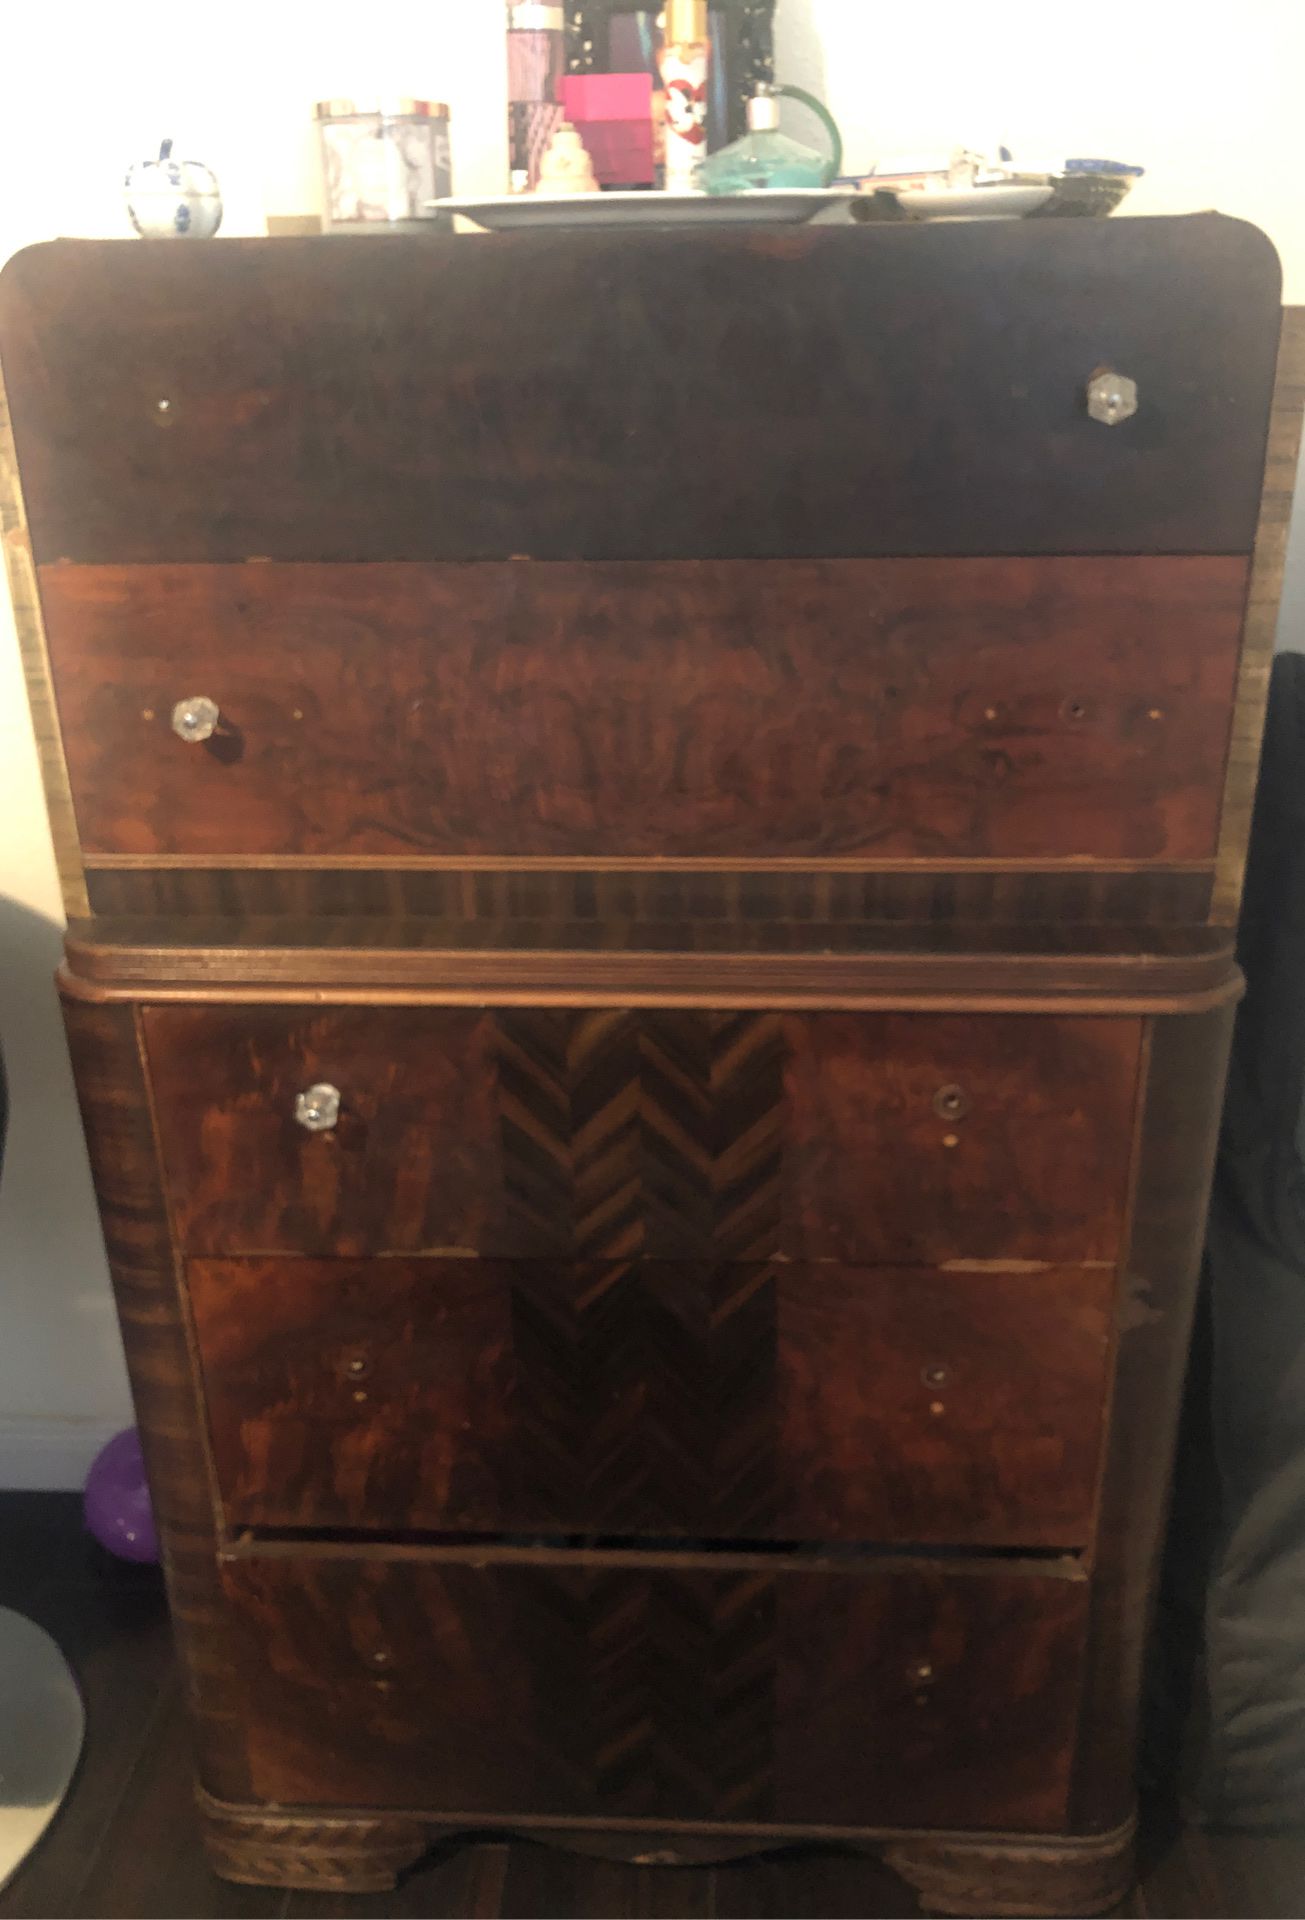 Antique dresser and side table